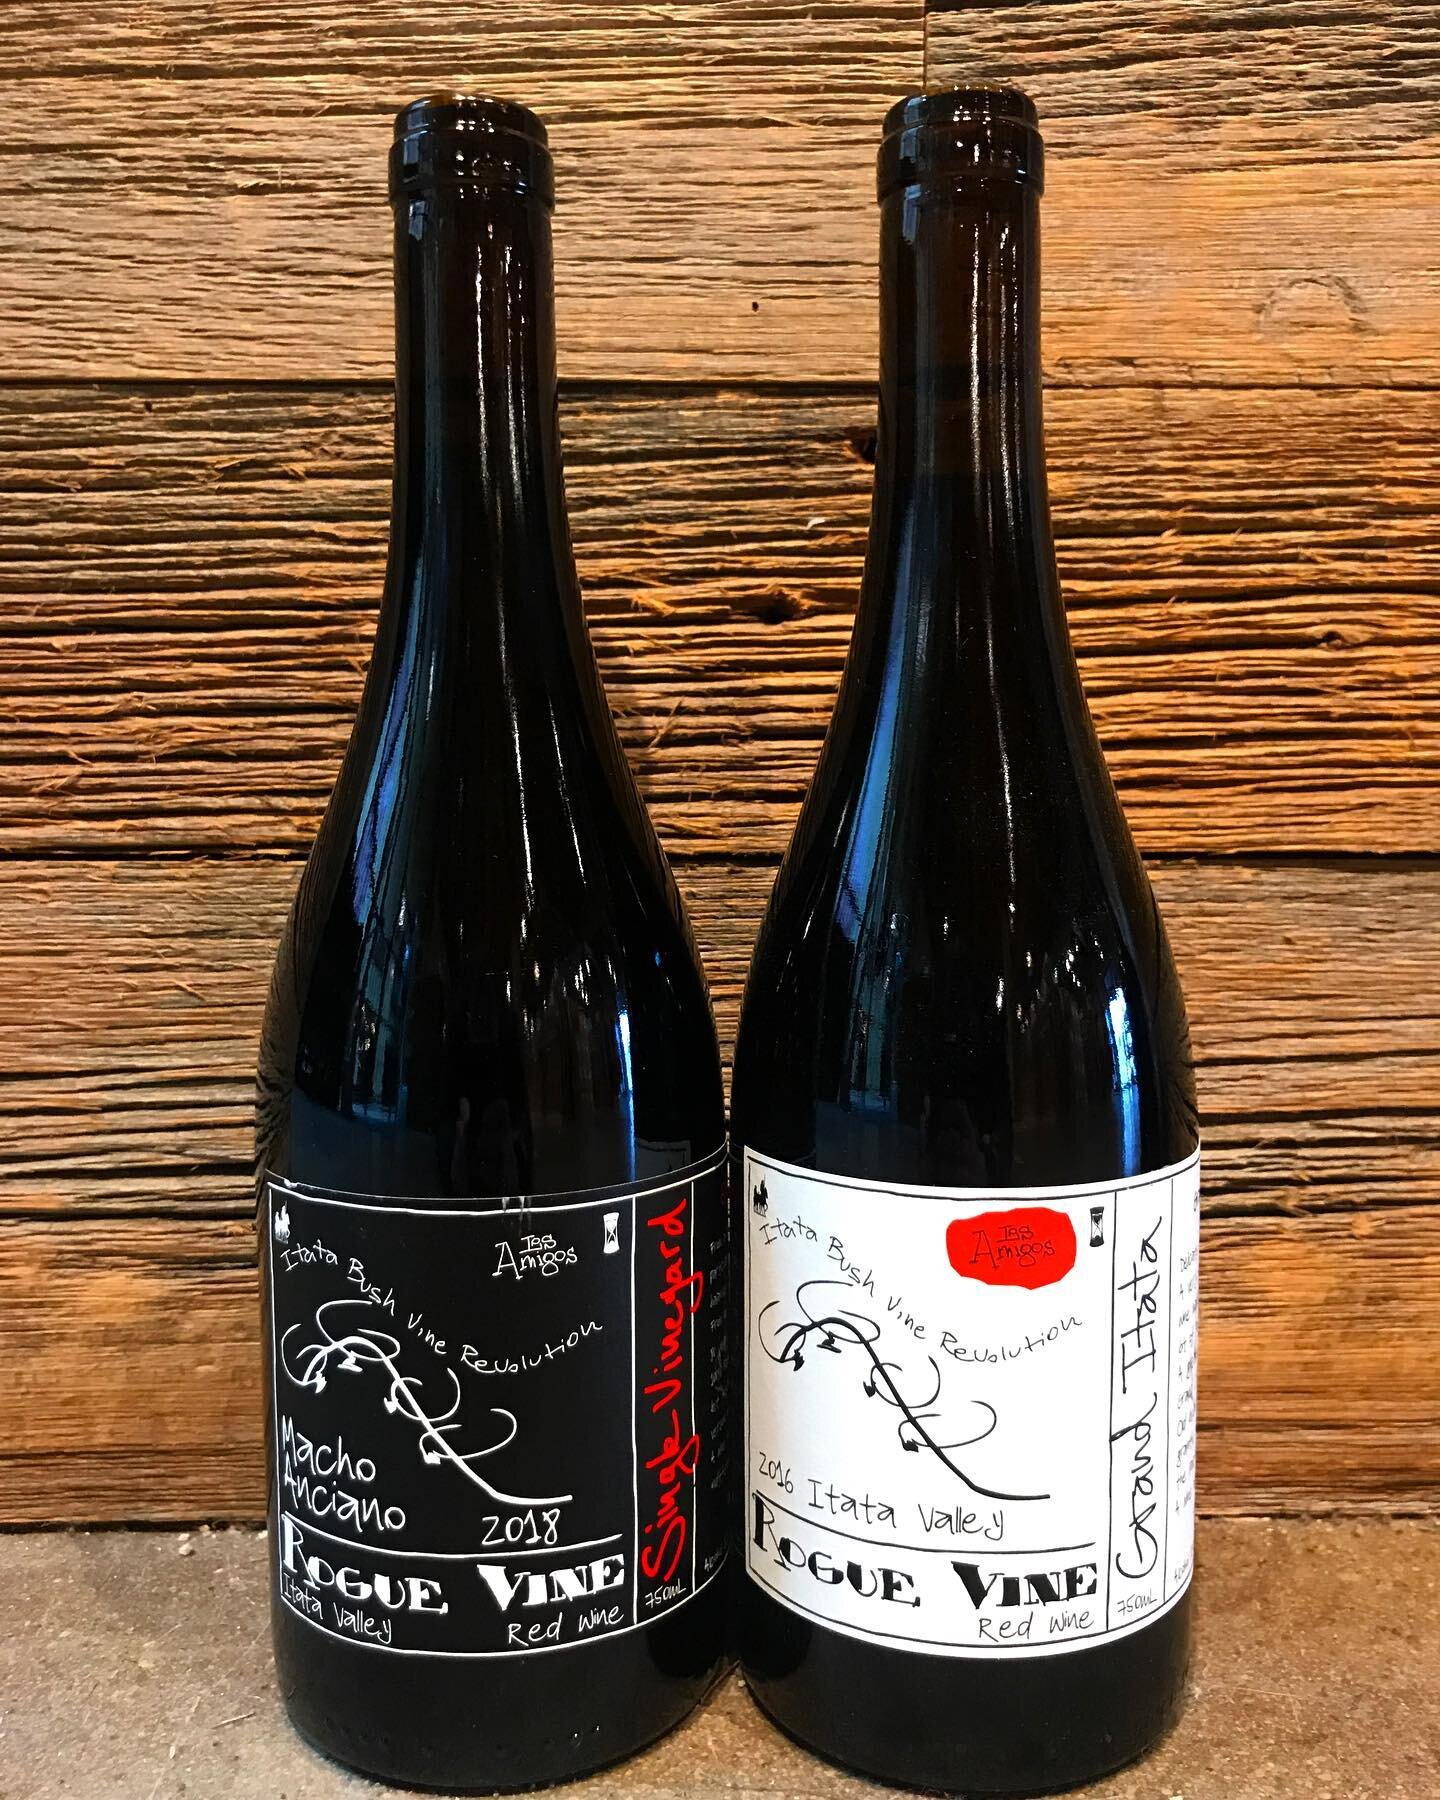 Our final introduction to natural Chile is here: Rogue Wines. Rogue is a collaboration between Leo Erazo (of A Los Vineteros Bravos, see that post too!) and Justin Decker. In 2014 their friendship transformed into a winery, making their first few win